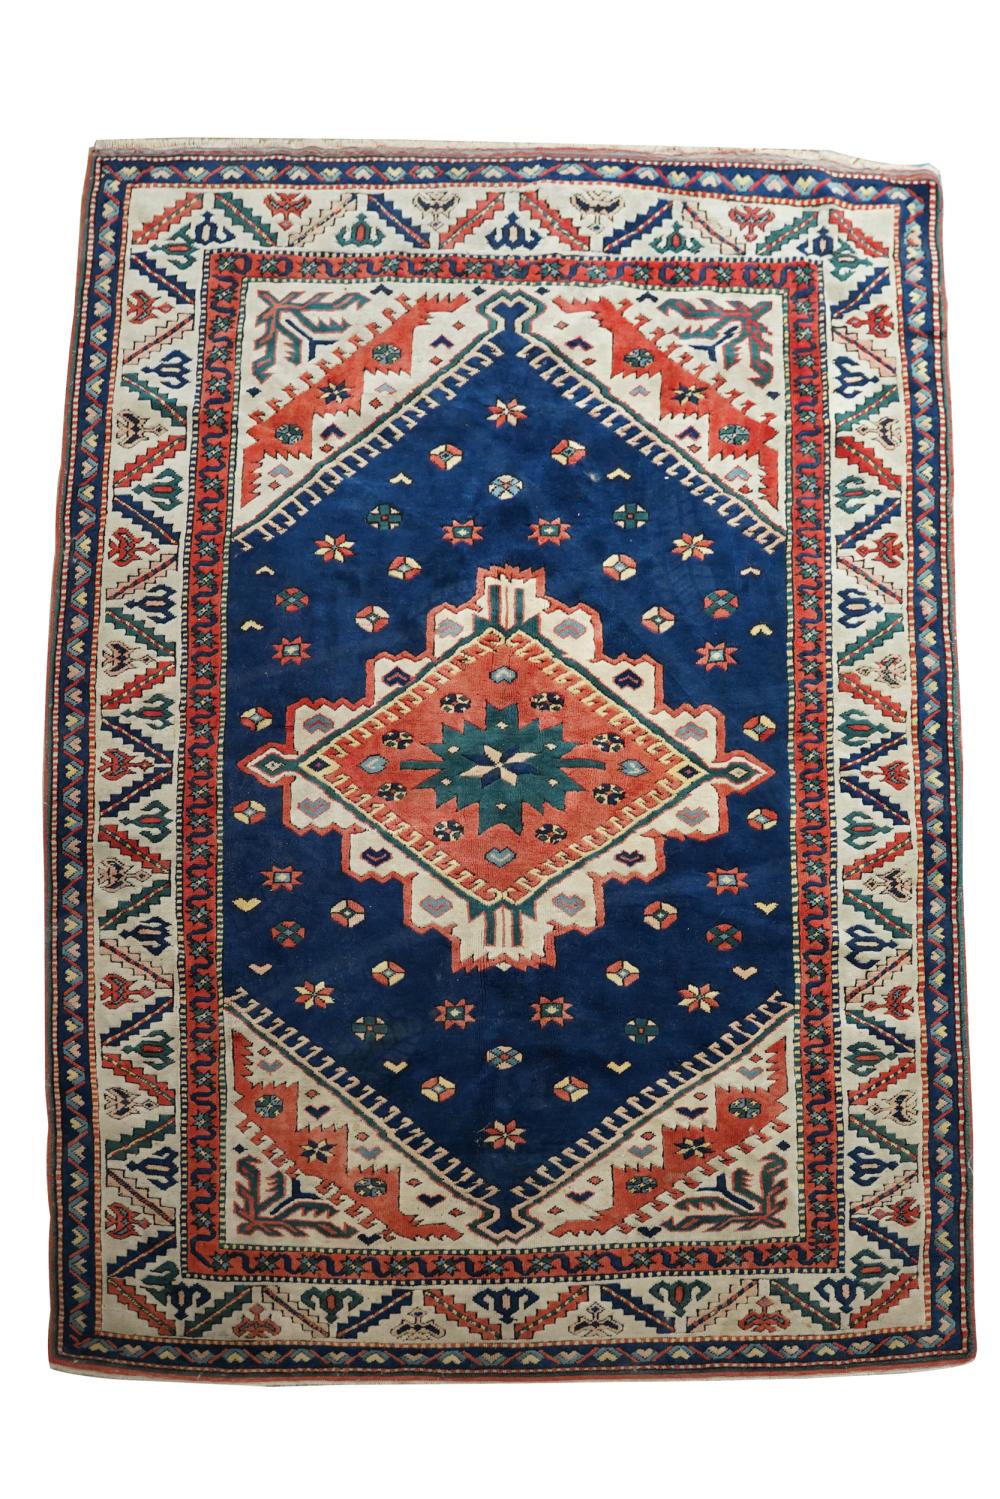 PERSIAN CARPETwith central medallion